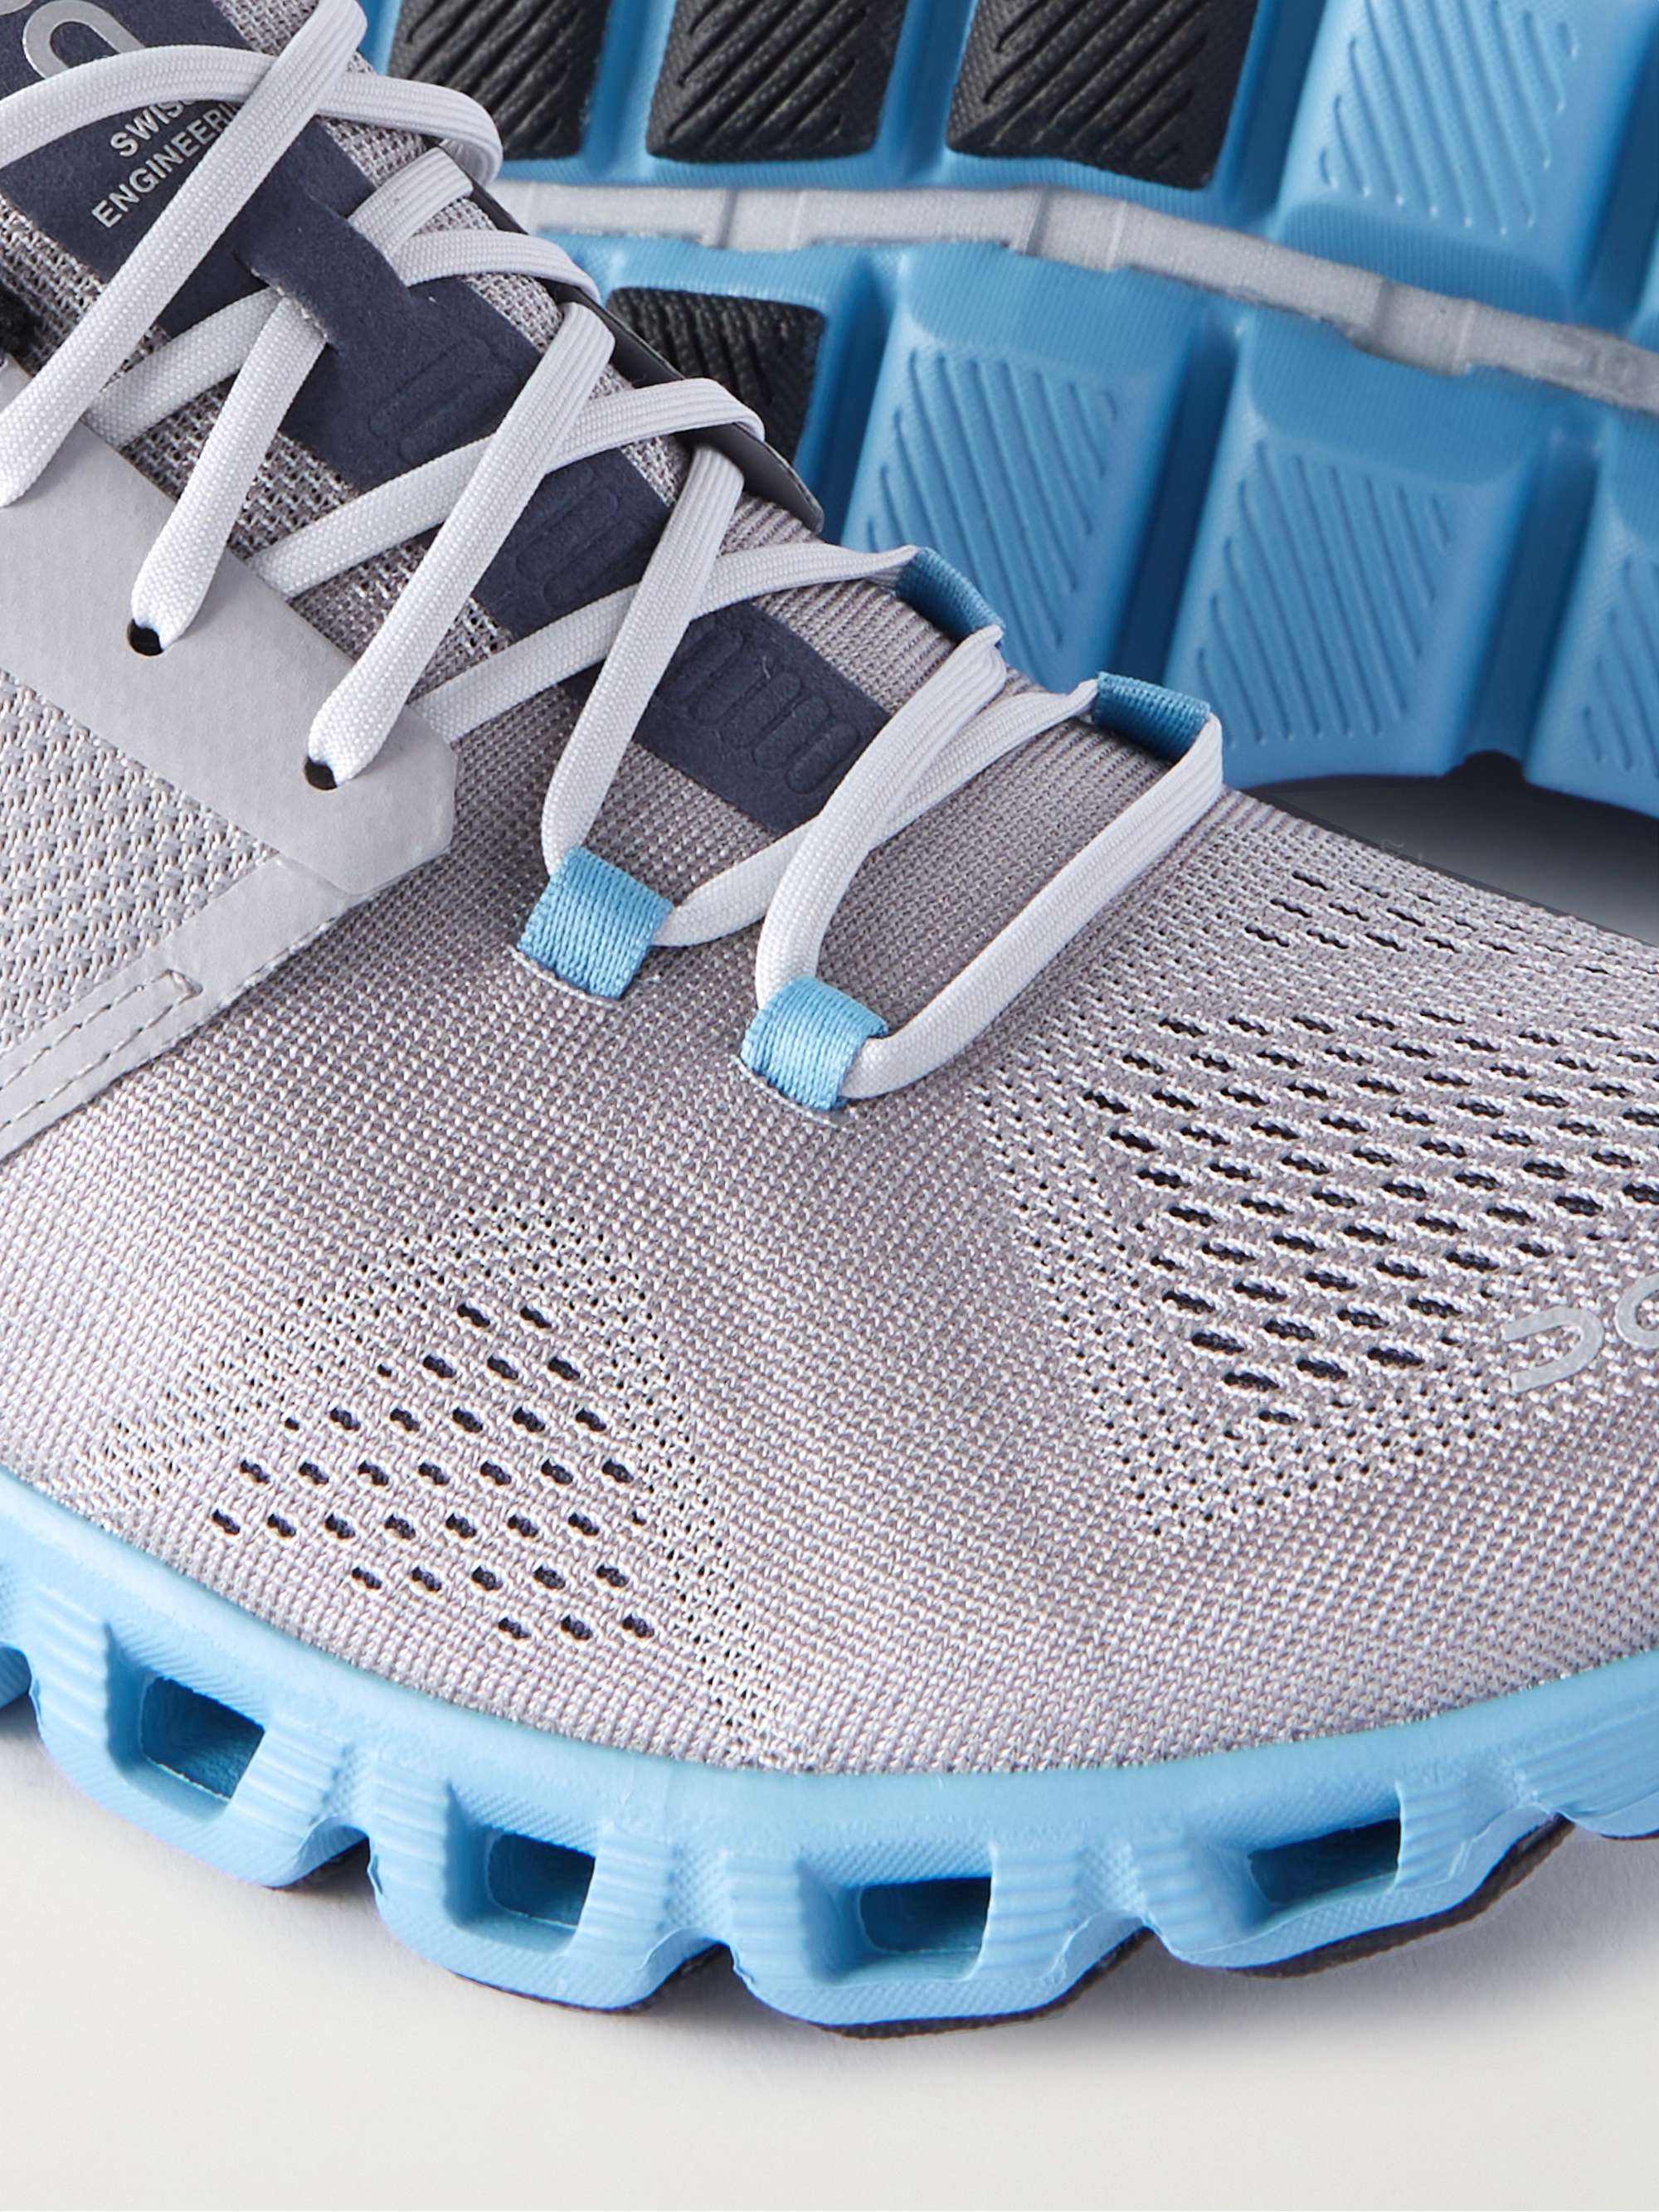 ON Cloud X Rubber-Trimmed Mesh Running Sneakers